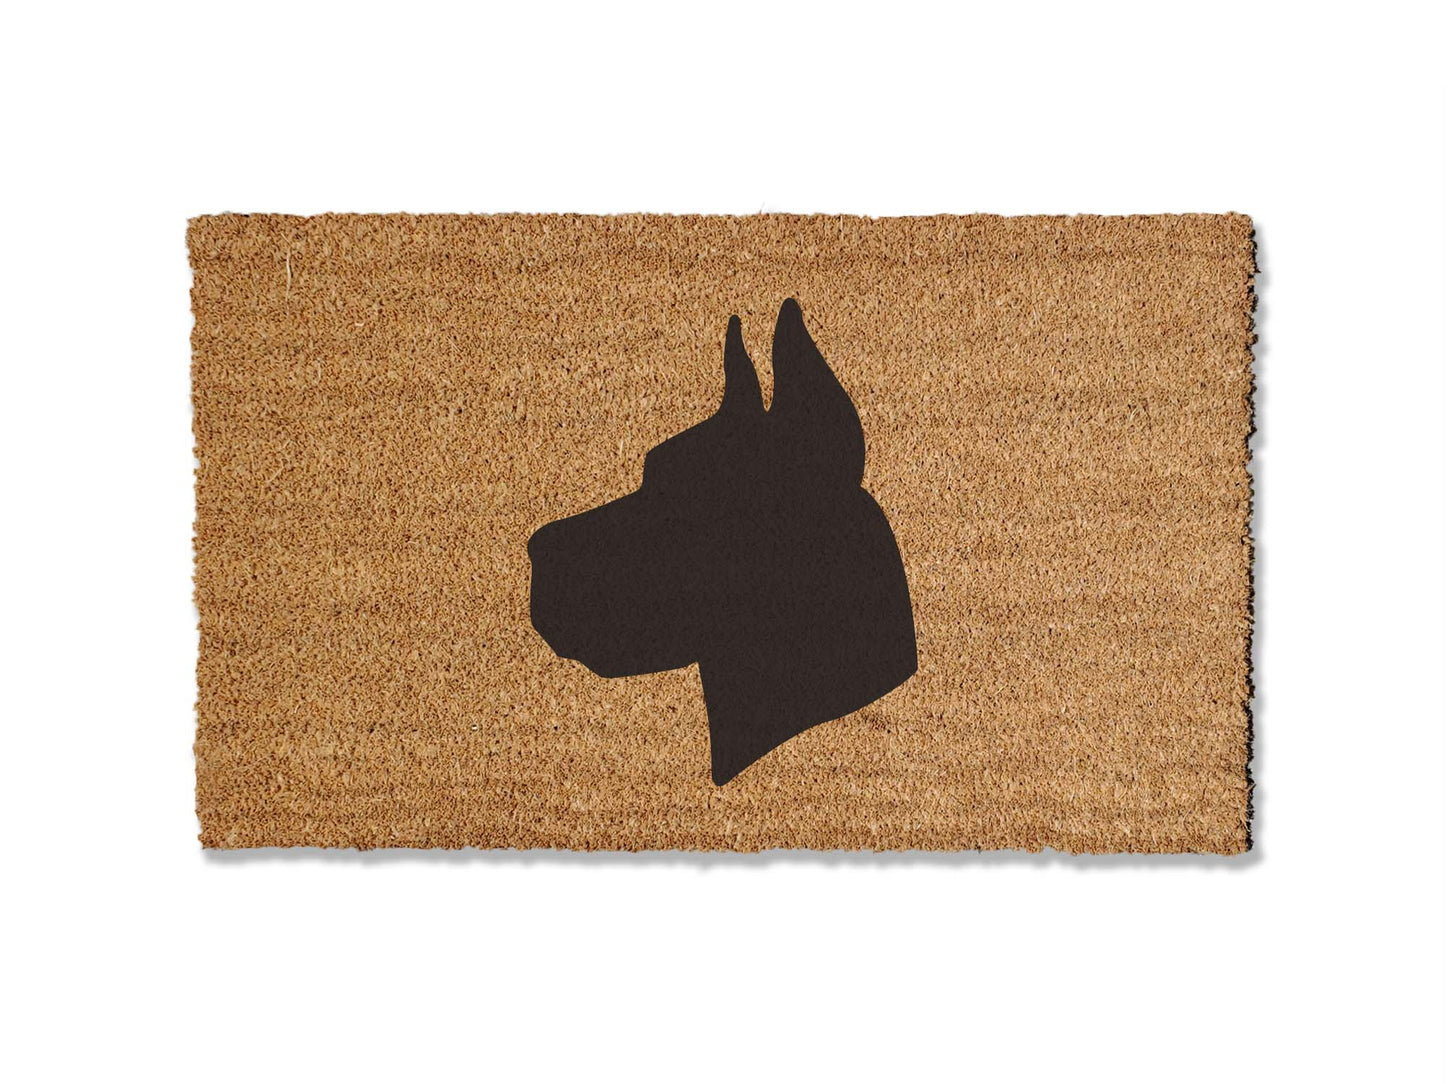 Welcome guests with our coir welcome doormat, featuring a charming Great Dane design. Available in multiple sizes, this is the perfect gift for Great Dane lovers, adding a touch of canine charm that effortlessly spruces up your entryway.